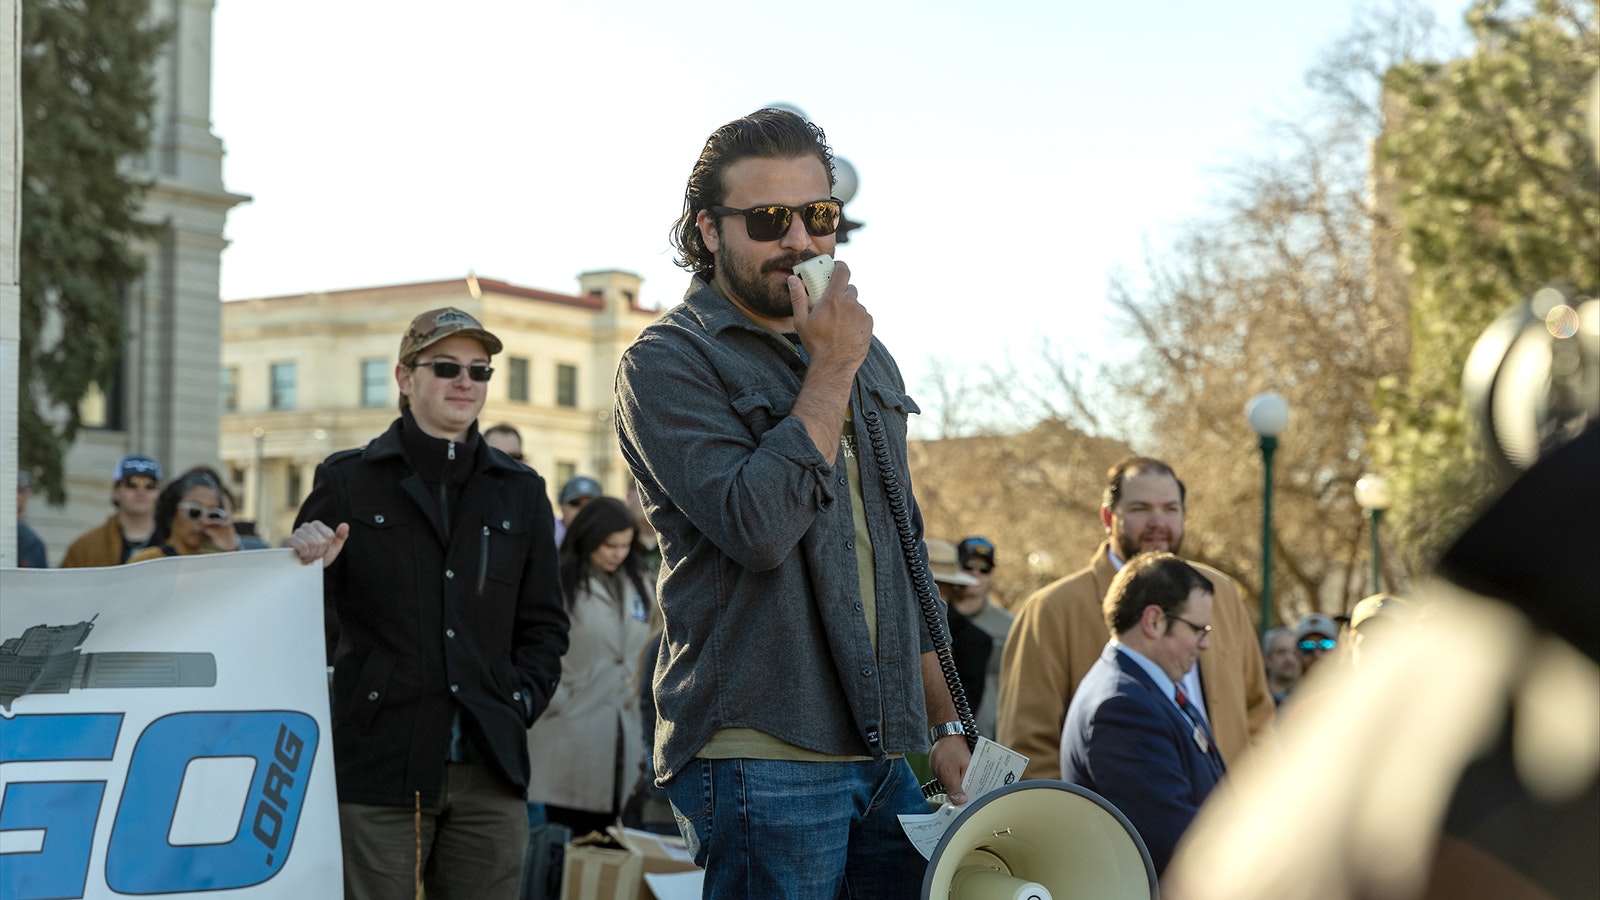 YouTube gun channel celebrity Brandon Herrera speaks Tuesday morning in front of the Colorado Capitol building at a rally protesting a proposed “assault weapons ban” bill.